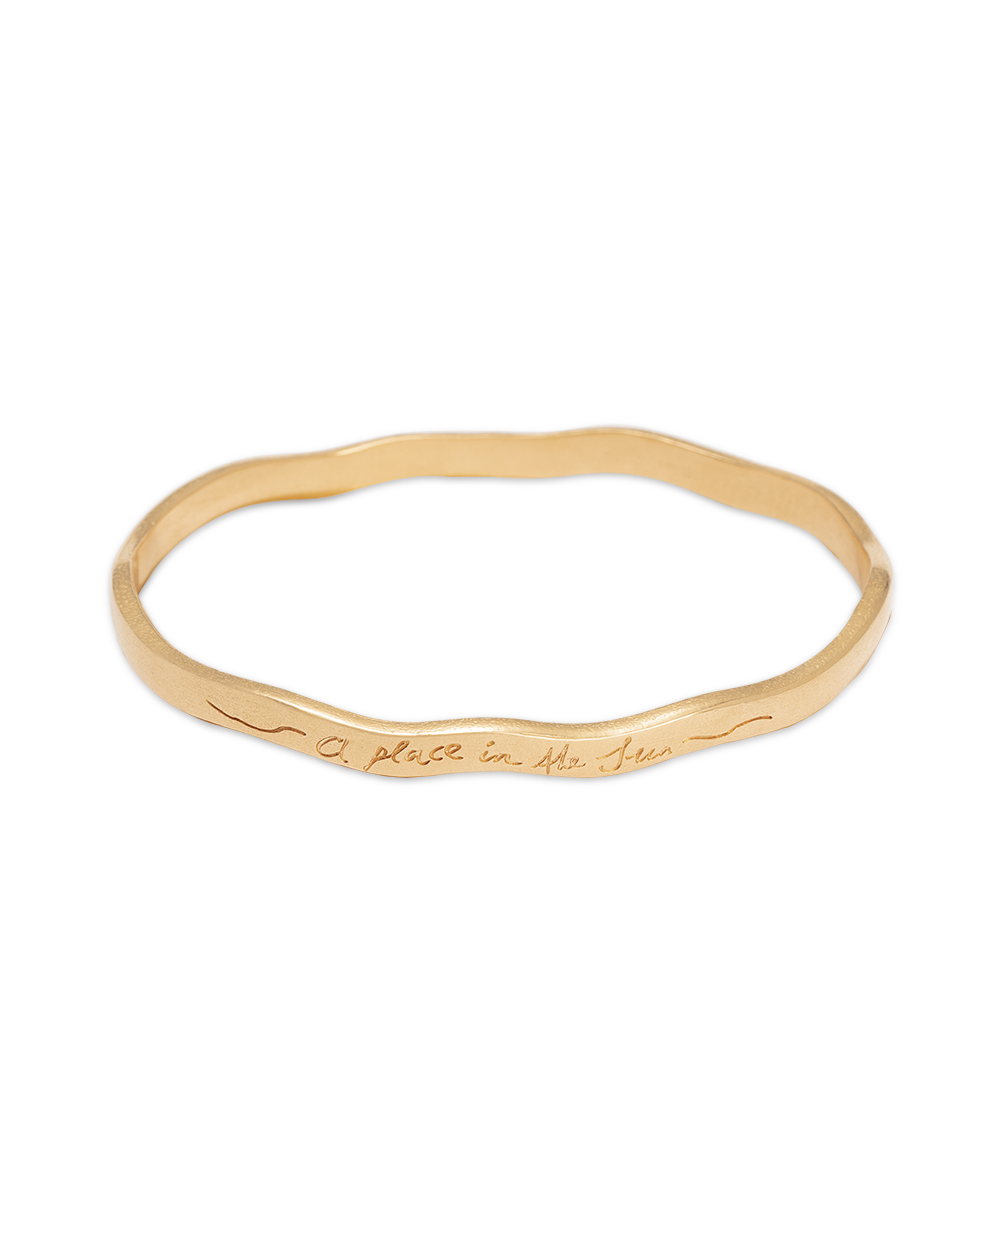 PLACE IN THE SUN BANGLE (18K GOLD VERMEIL)